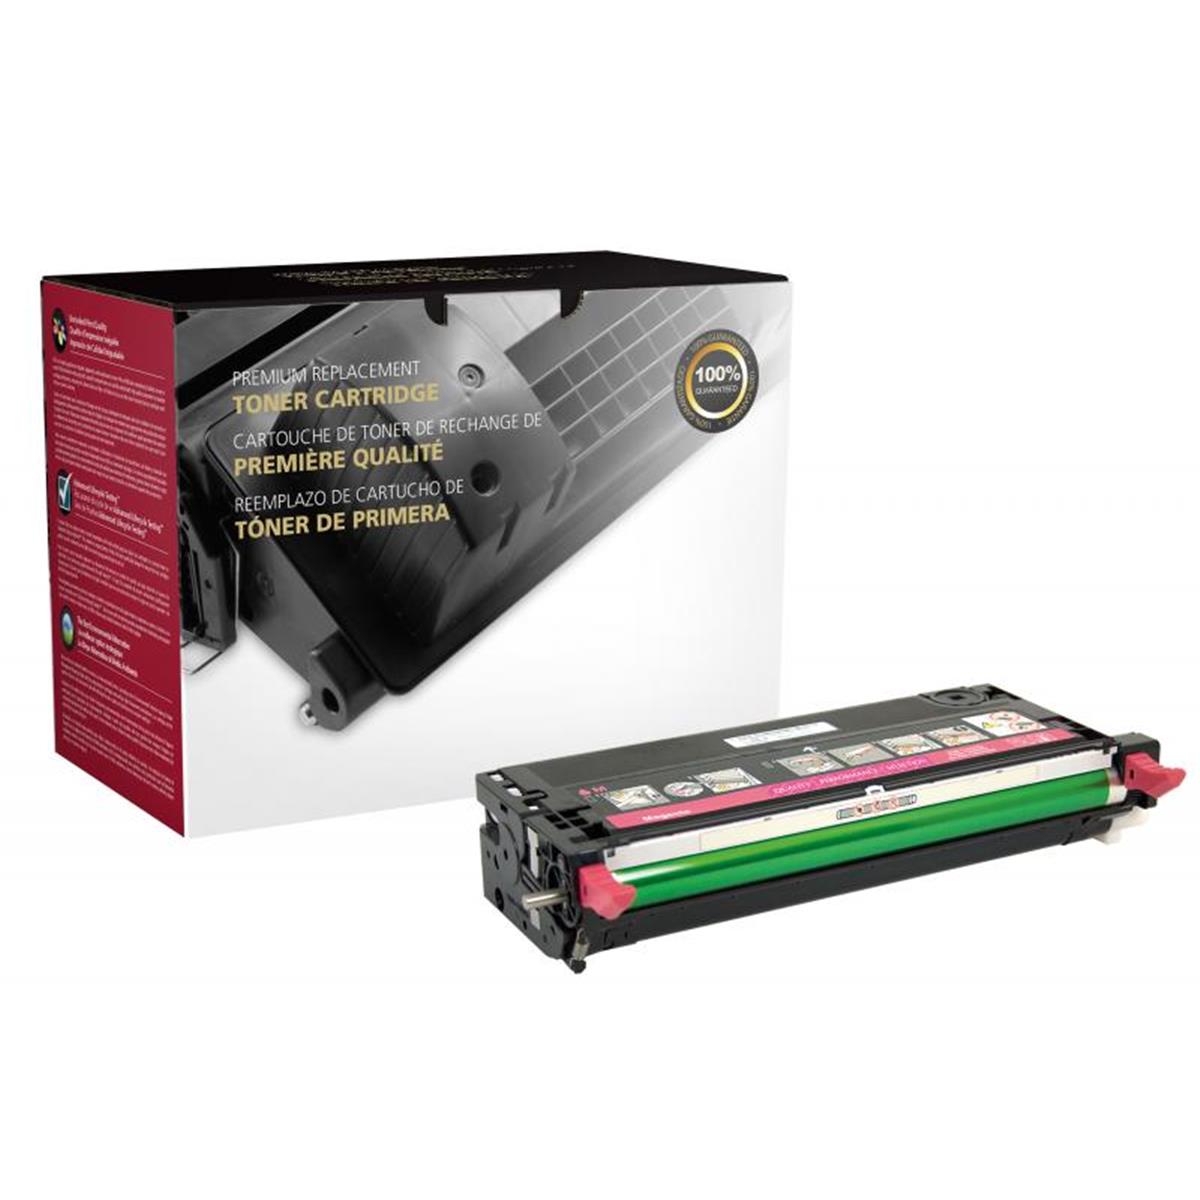 Picture of Dell 200118 High Yield Magenta Toner Cartridge for Dell 3110 & 3115